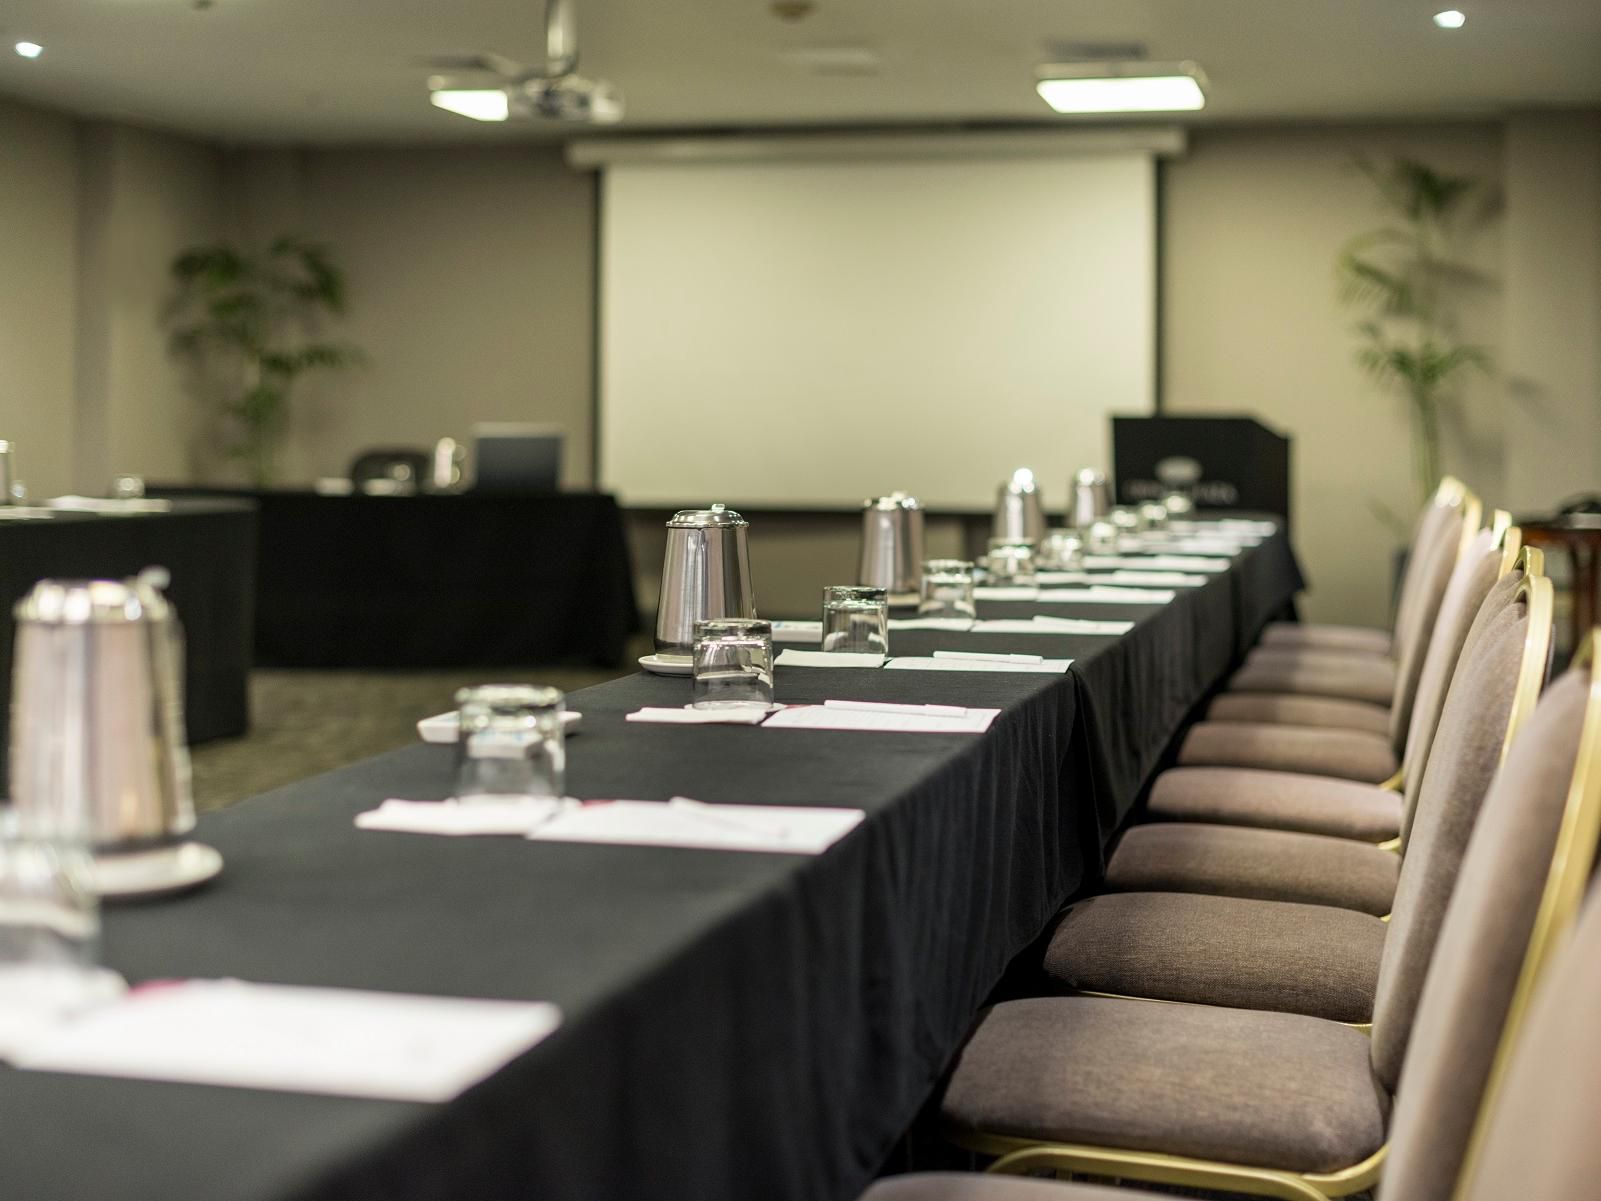 To ensure business success, companies versatile meeting rooms are located available to attend any event.

Our hotel features seven exquisite meeting rooms, excellent catering and the latest audio/visual equipment.